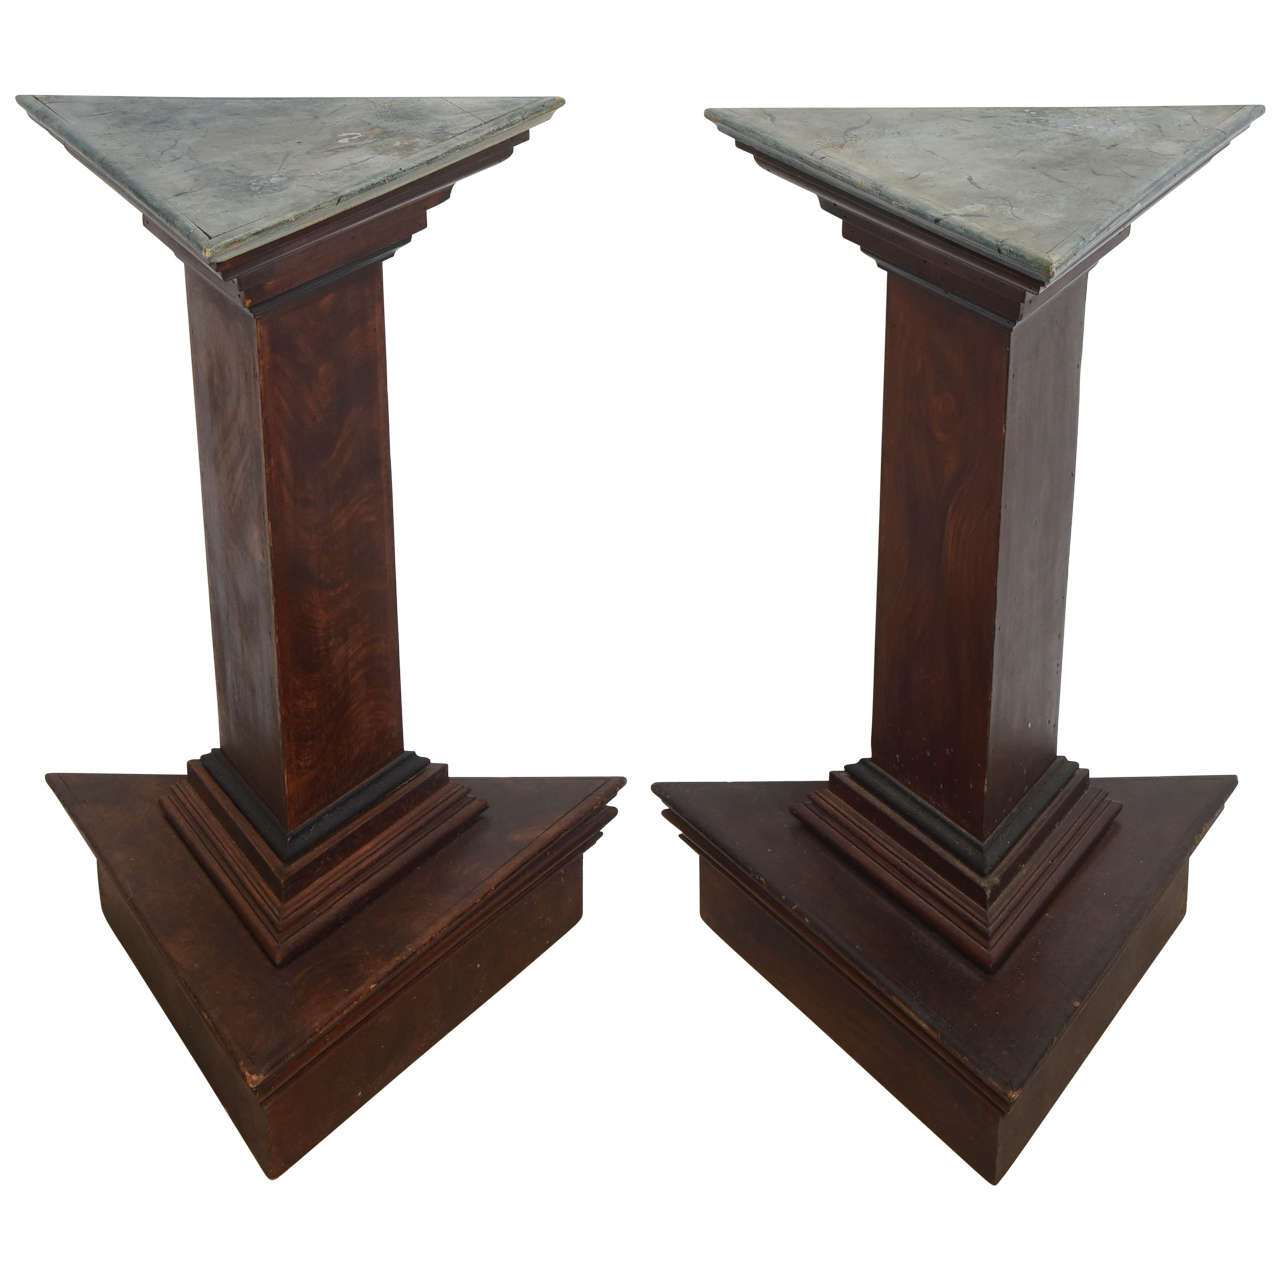 Pair of Italian Neoclassic Faux Bois and Faux Marble Painted Pedestals